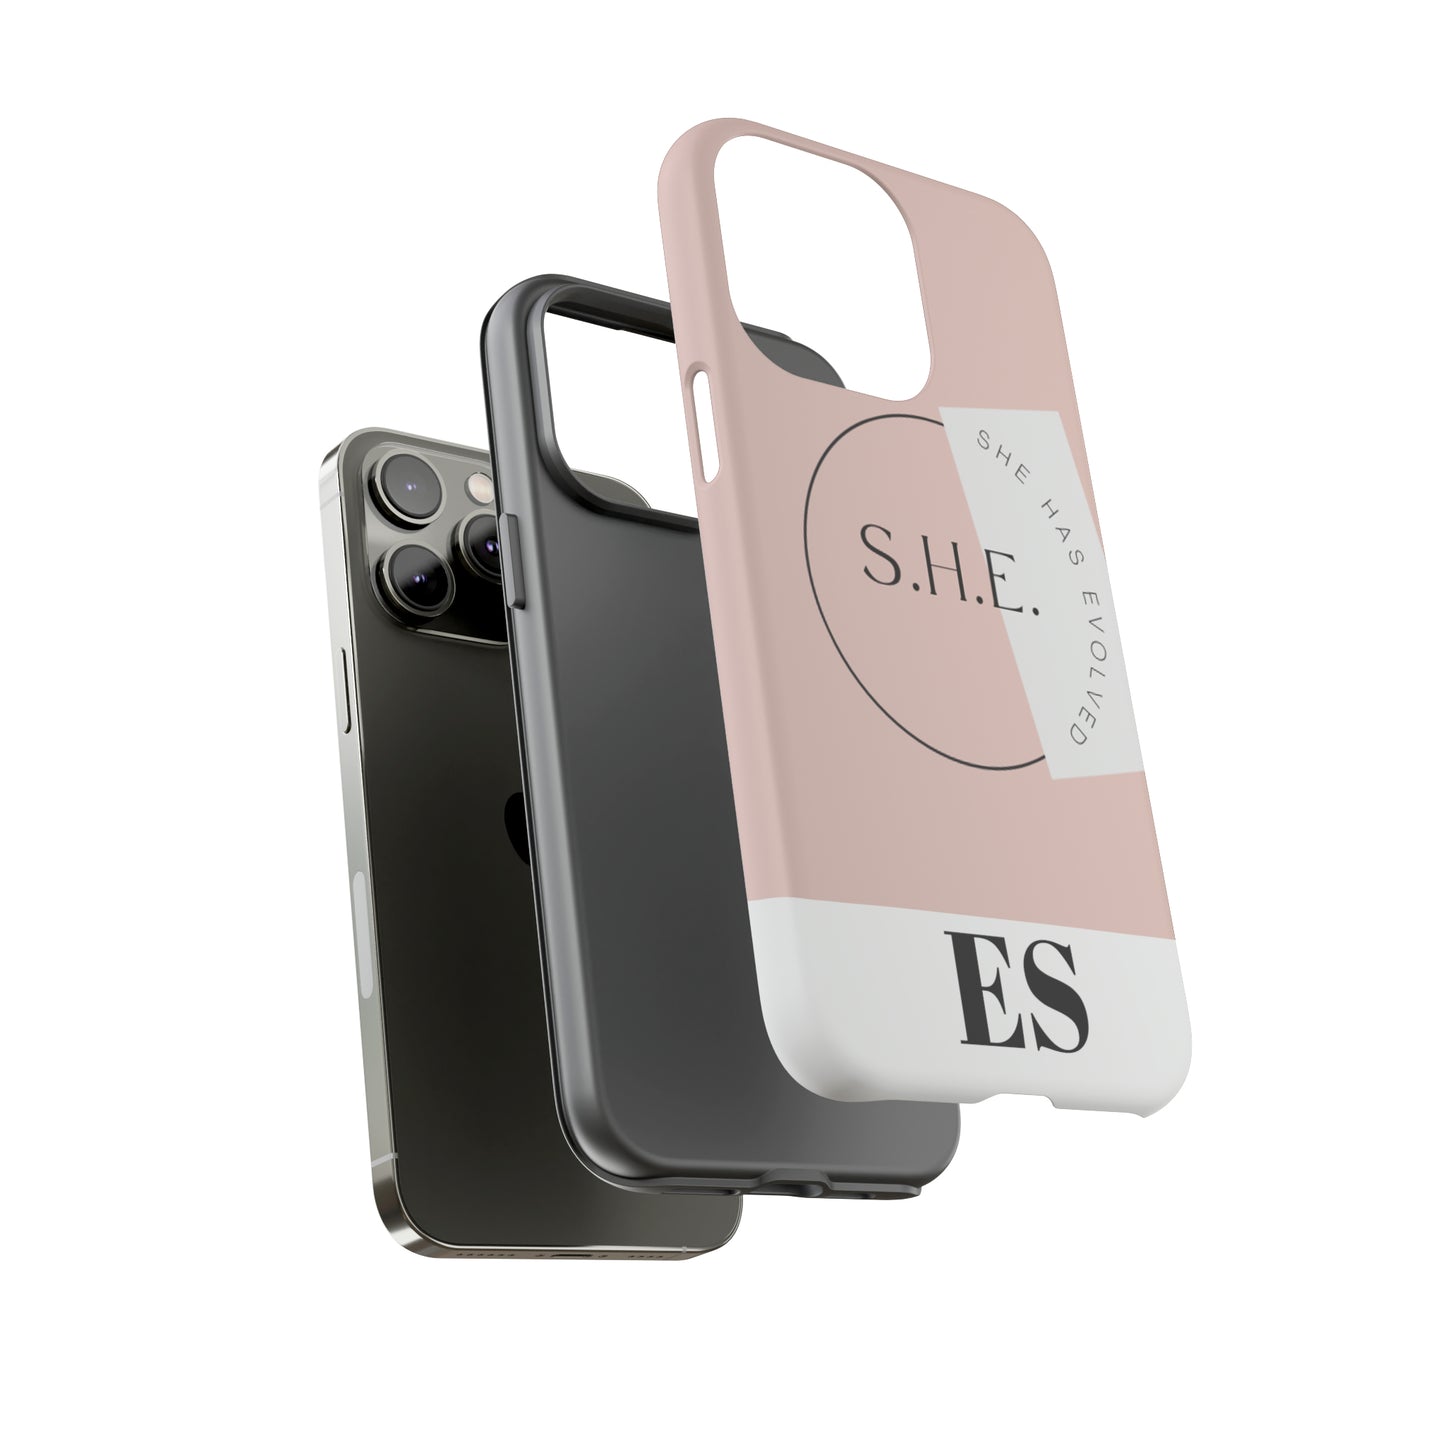 S.H.E- Phone case with customizable Initials